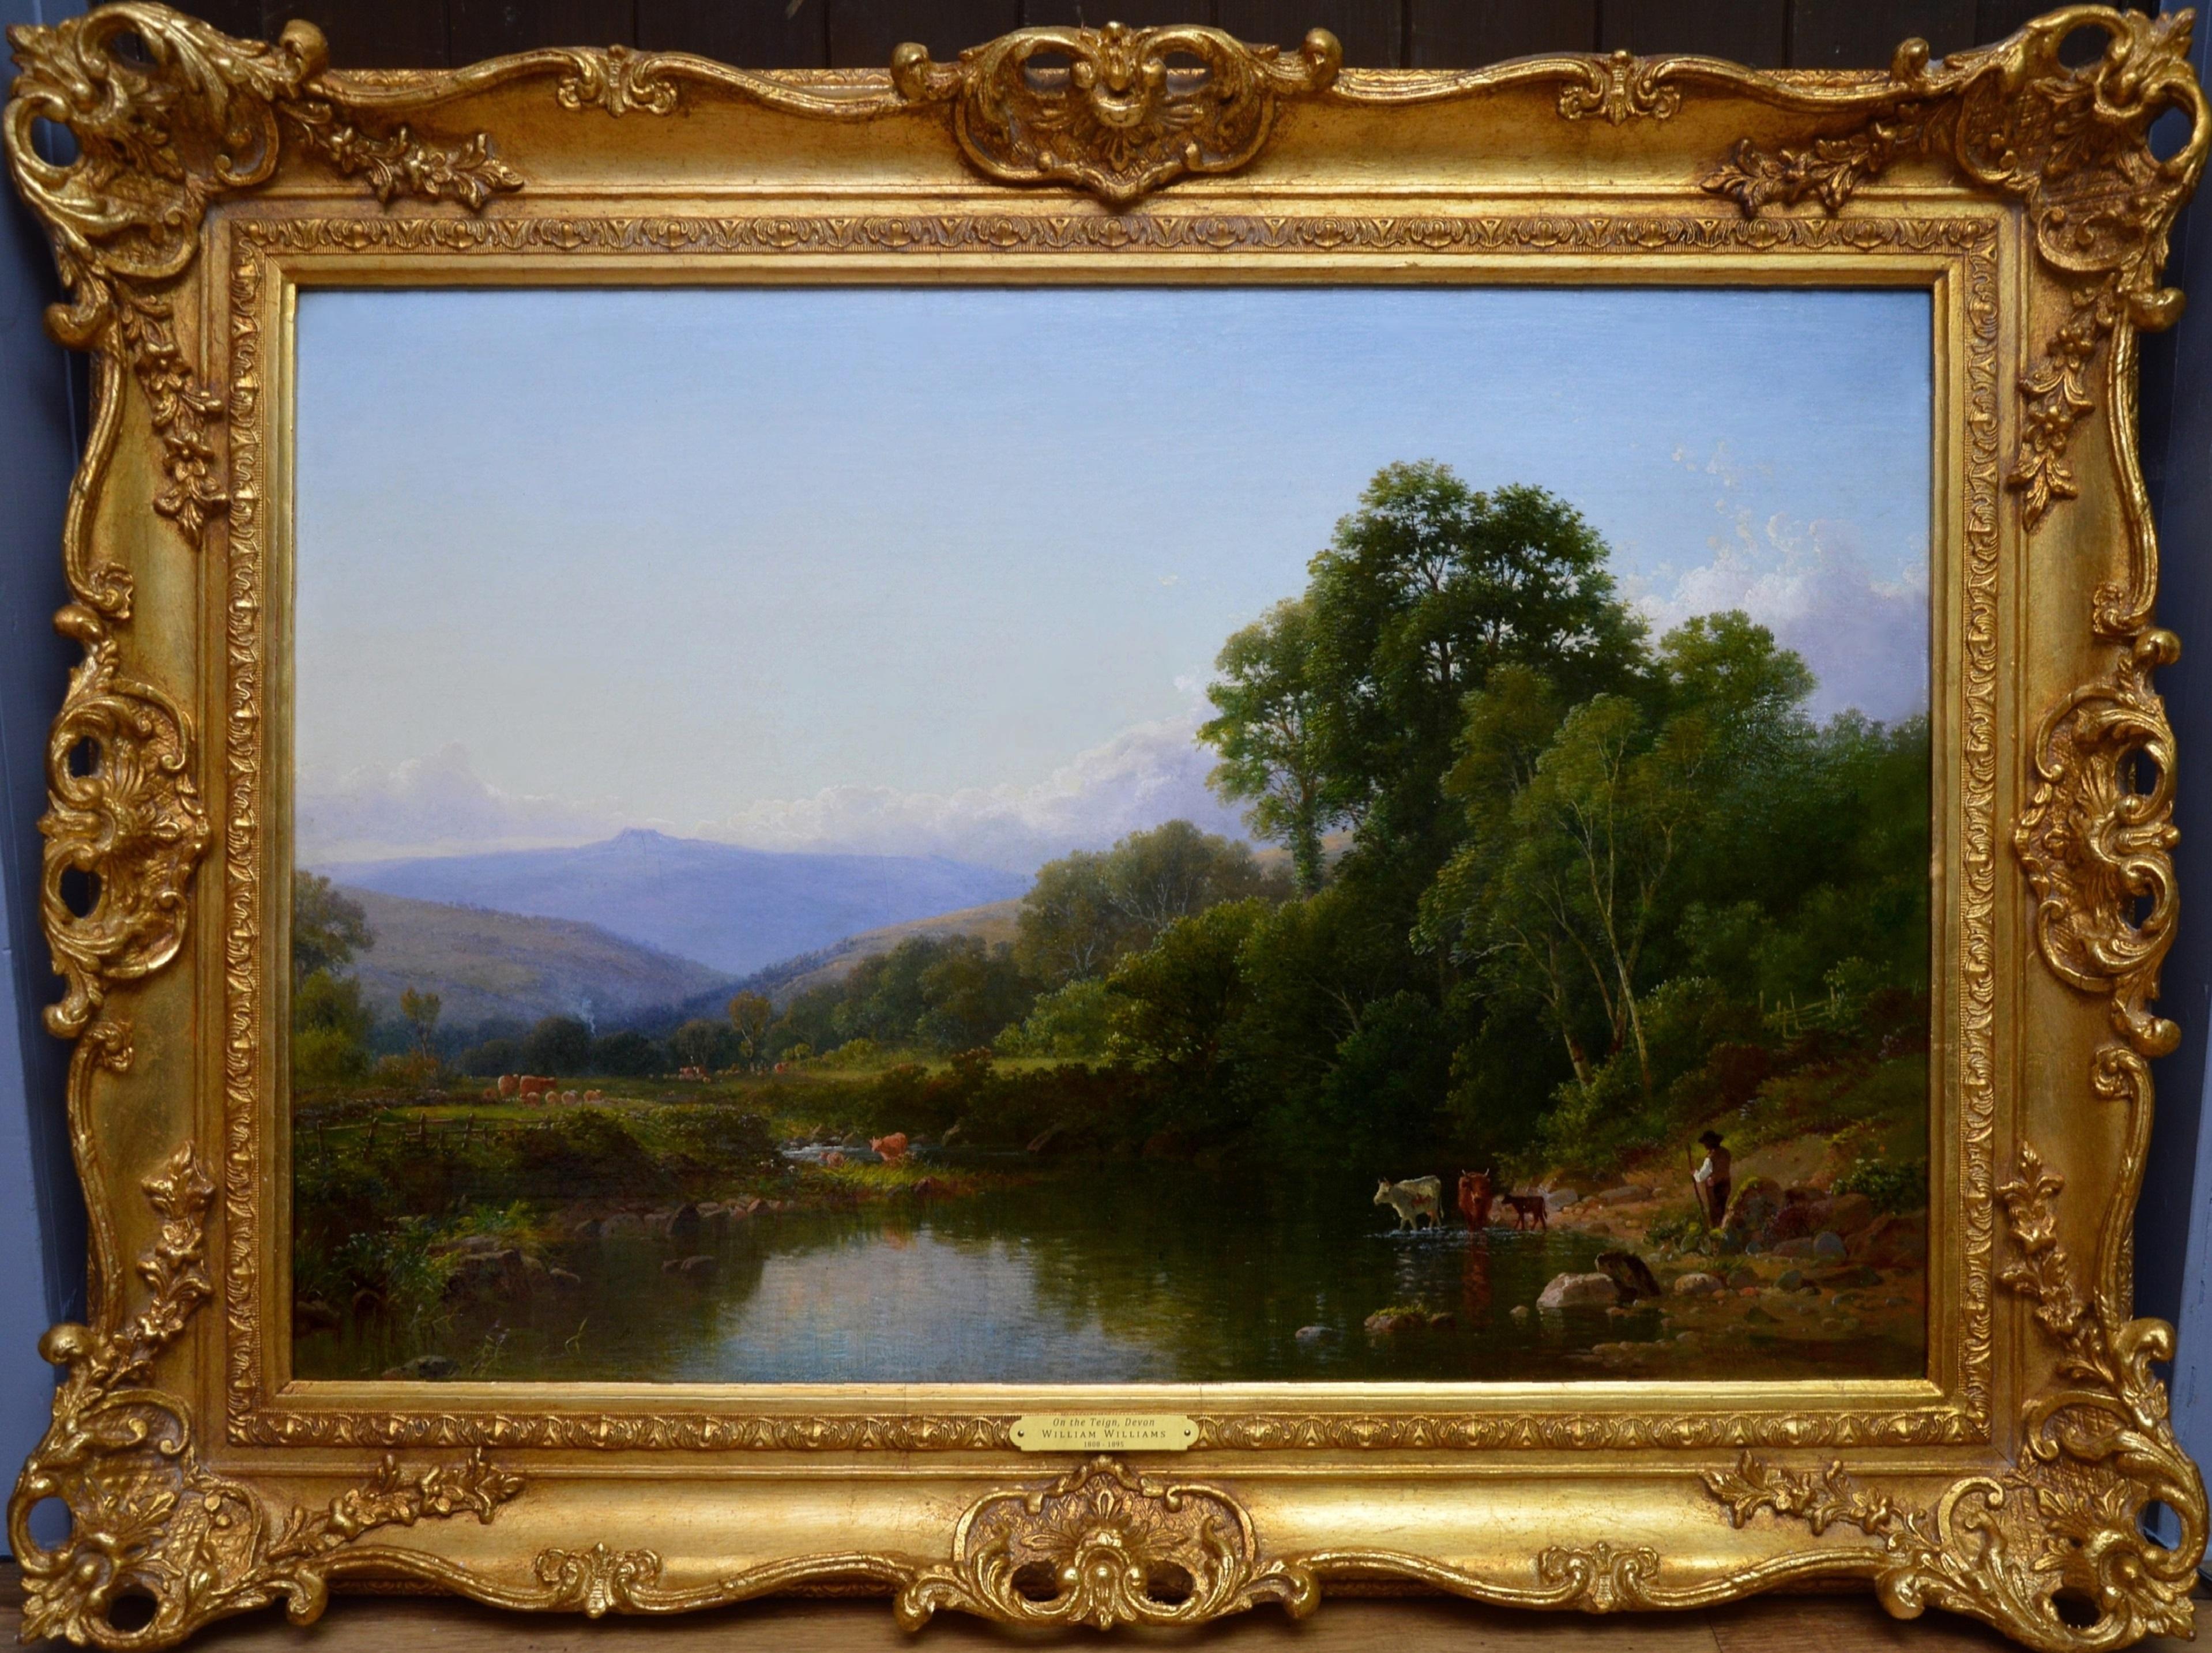 William Williams of Plymouth Animal Painting - On the Teign, Devon - 19th Century English River Landscape Oil Painting